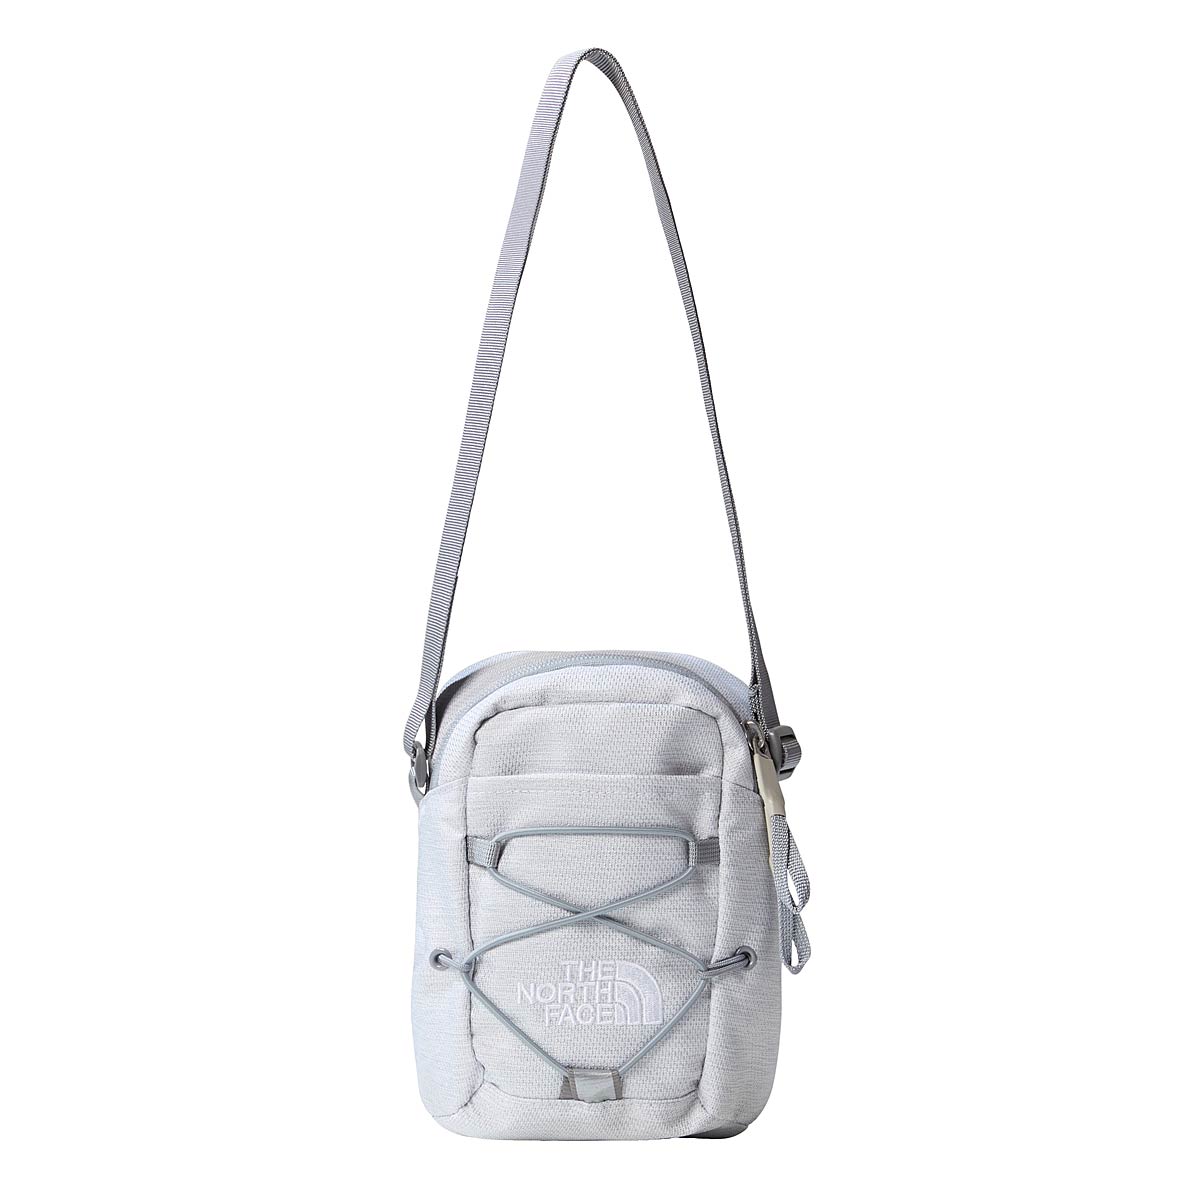 The North Face Jester Crossbody, White/grey ONE